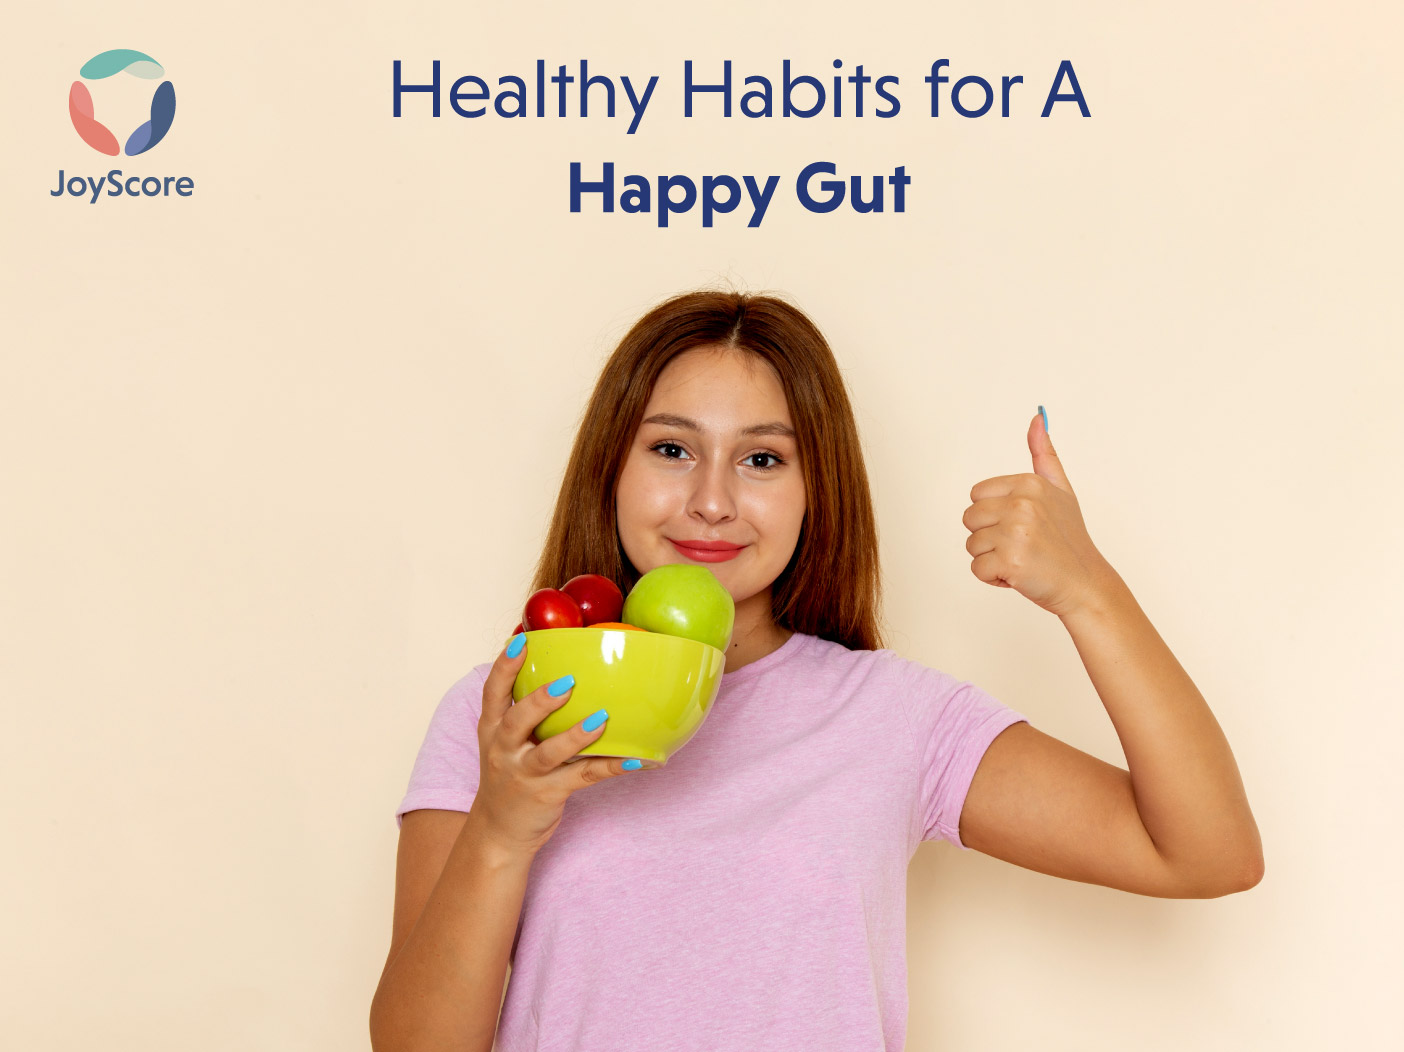 HEALTHY HABITS FOR A HAPPY GUT